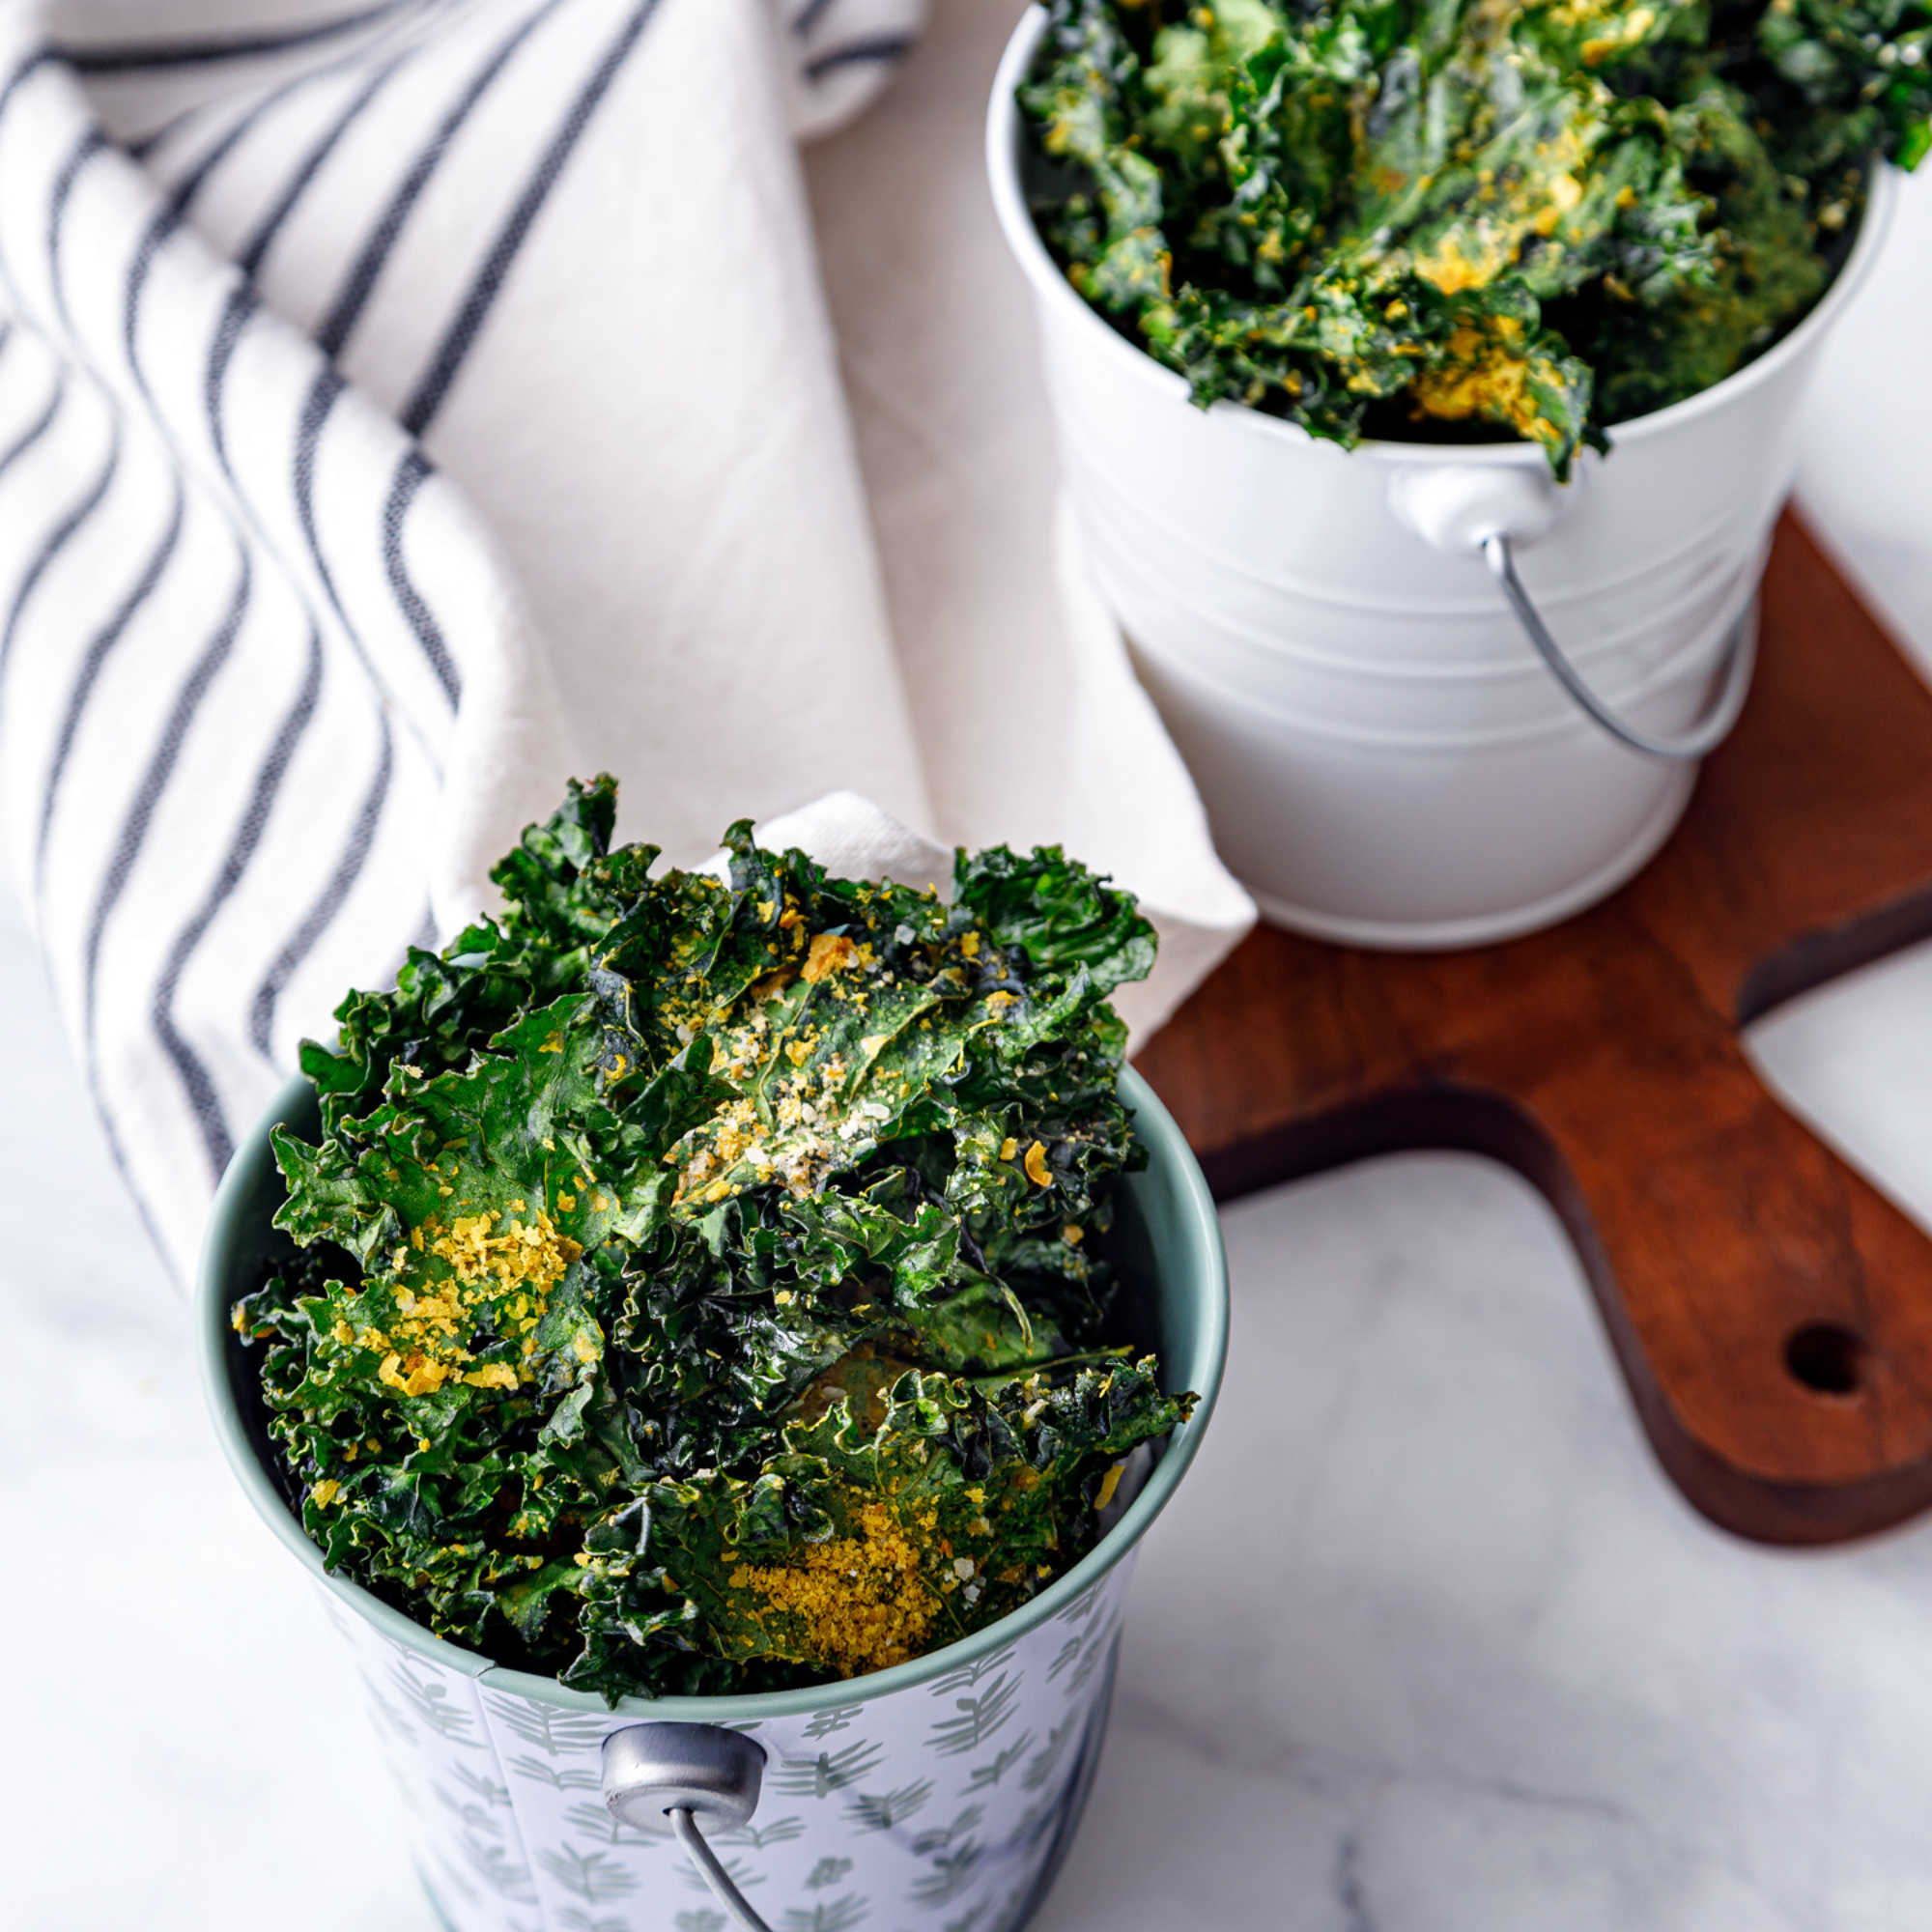 two buckets of kale chips sprinkled with nutritional yeast sitting on a white table top with a blue and white striped cloth